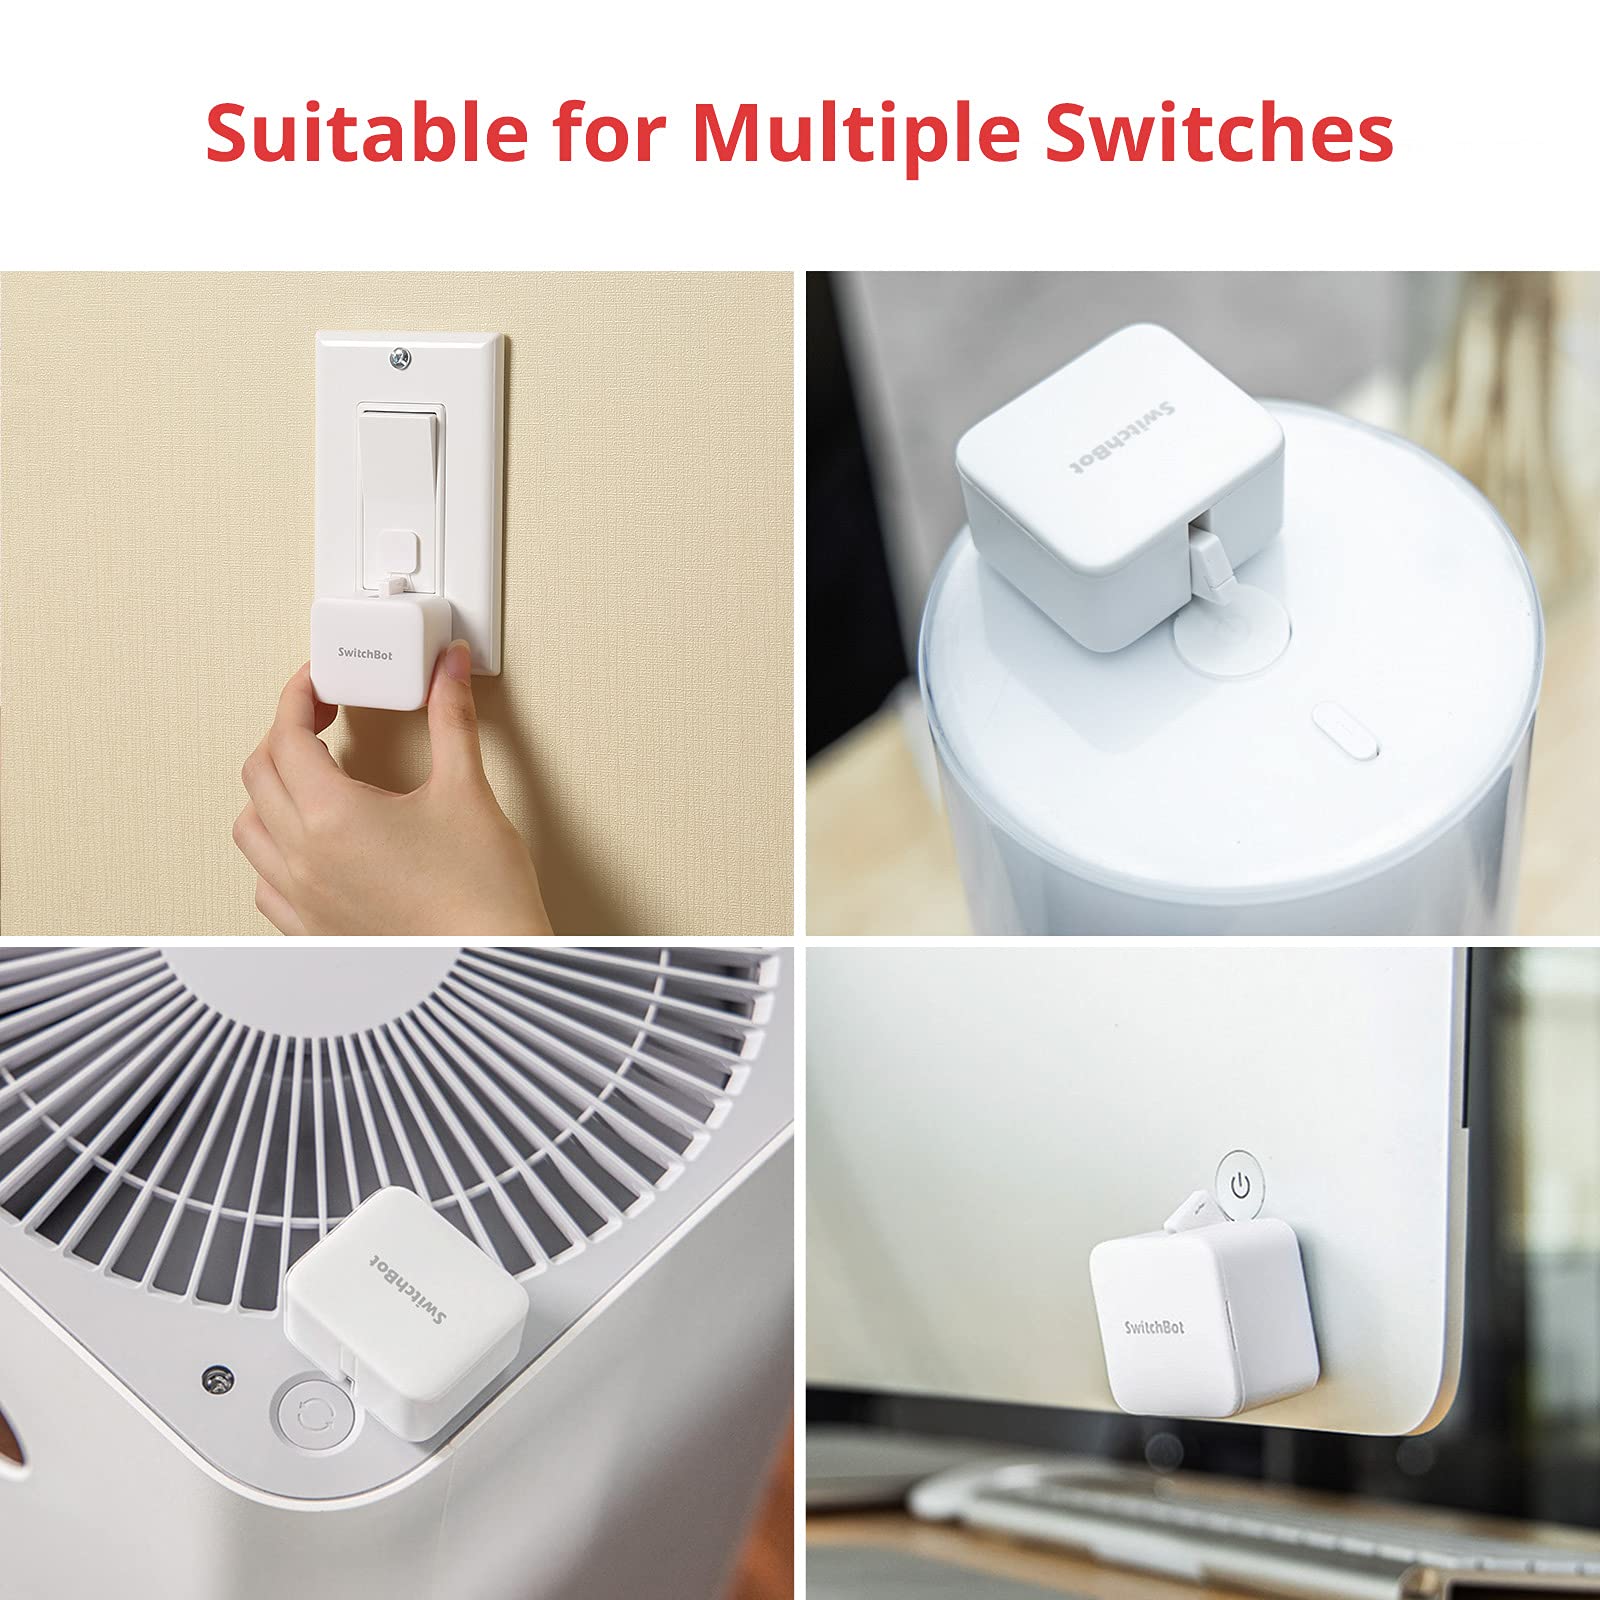 SwitchBot Smart Switch Button Pusher - Fingerbot for Automatic Light Switch, Timer and APP Bluetooth Remote Control, Works with Alexa, Google Home, HomeKit When Paired with SwitchBot Hub (White)